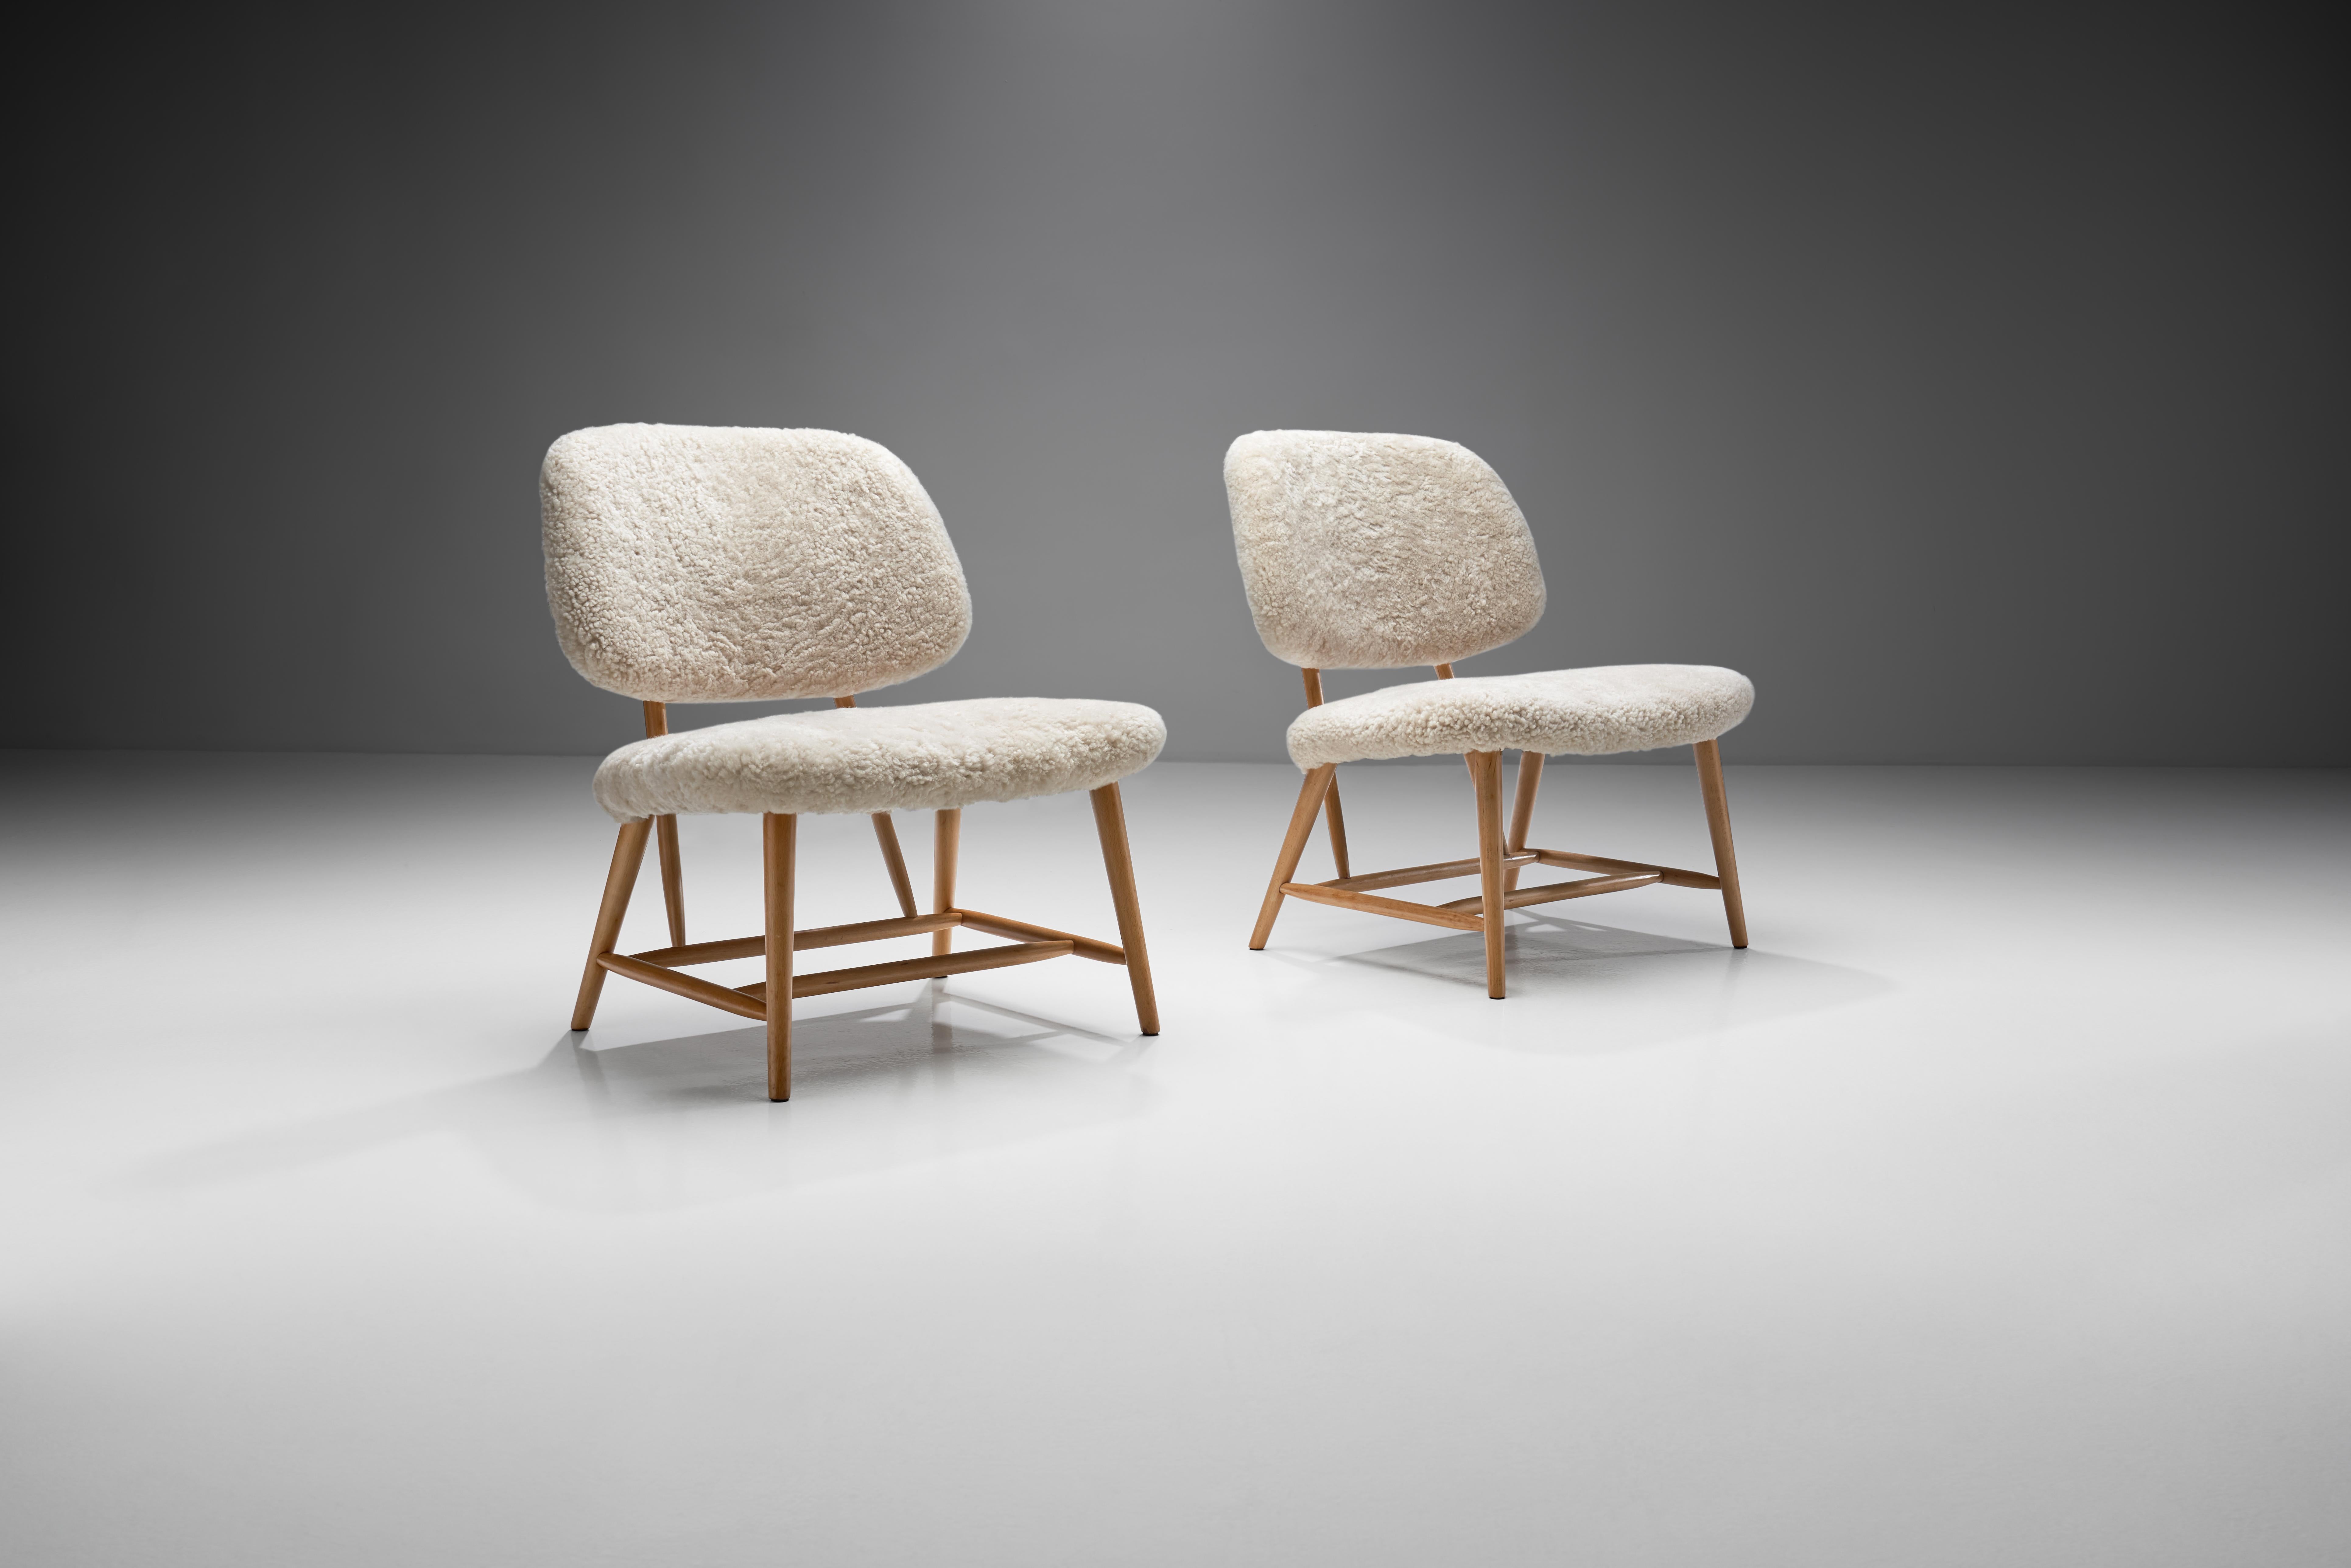 Mid-Century Modern Pair of “TeVe” Chairs by Alf Svensson for Studio Ljungs Industrier AB, SWE